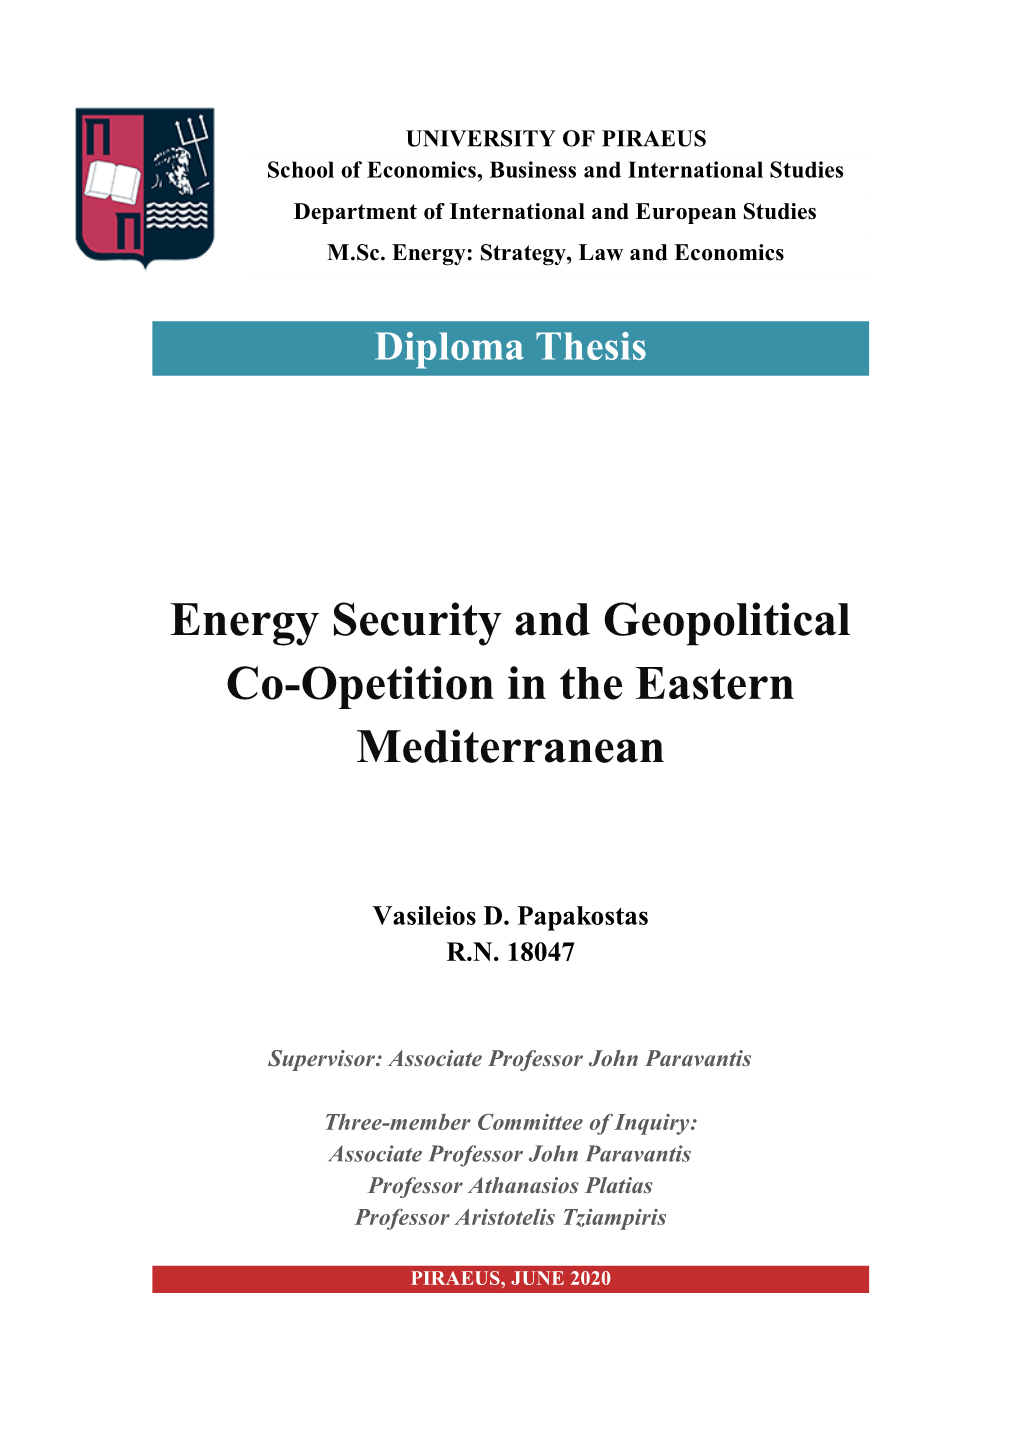 Energy Security and Geopolitical Co-Opetition in the Eastern Mediterranean